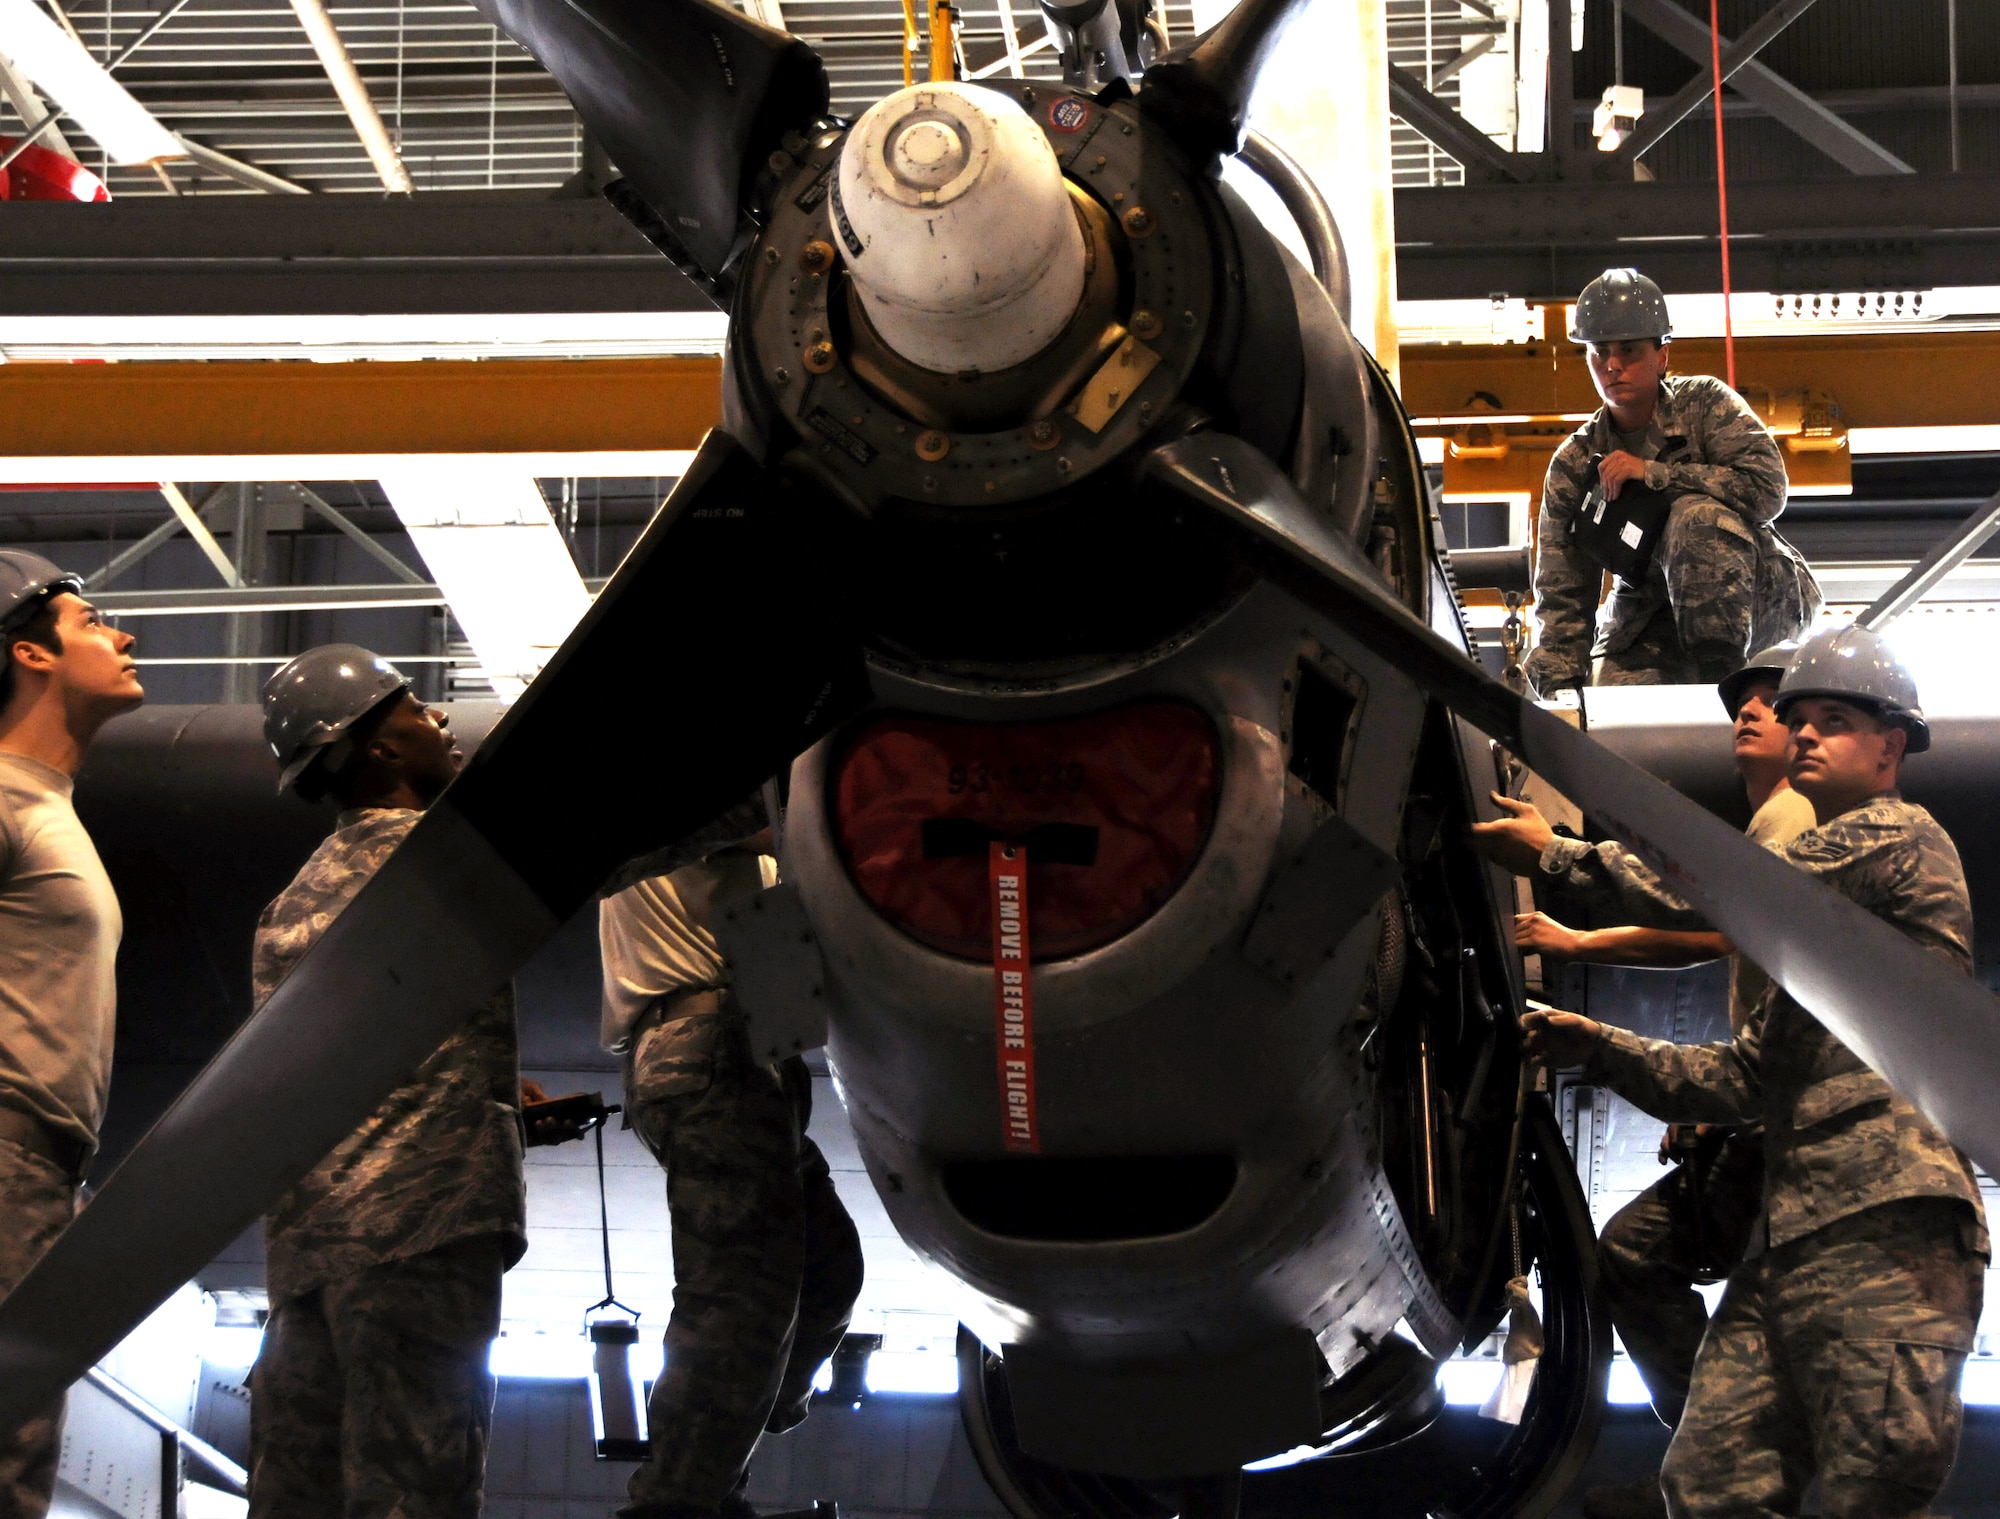 Airmen from the 94th Maintenance Squadron place an engine into the wing of a C-130 Hercules at Dobbins Air Reserve Base, Ga., Sept. 25, 2014. On Sept. 29, the 94th Airlift Wing is sending one C-130 and a team of 44 Airmen to partake in RED FLAG-Alaska 15-1. (U.S. Air Force photo by Senior Airman Daniel Phelps/Released)